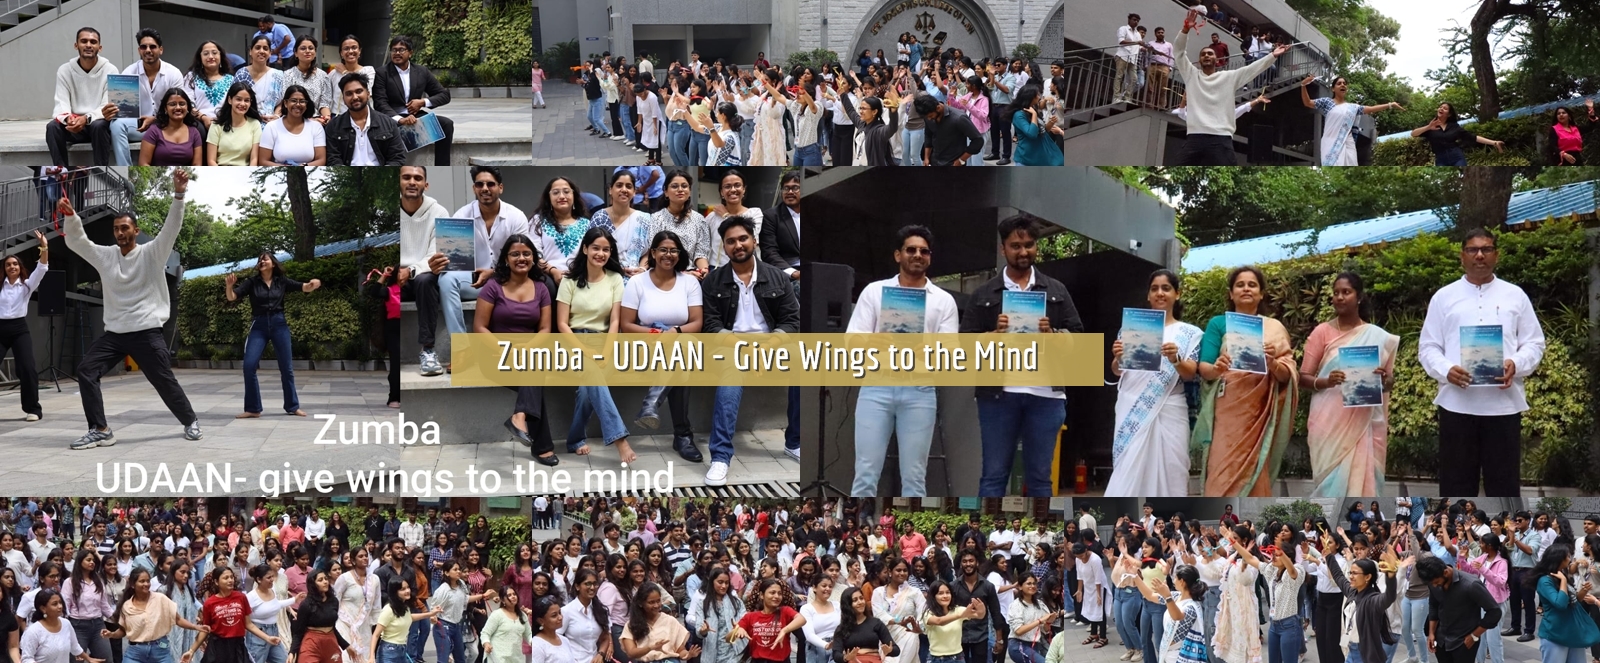  Zumba - UDAAN - Give Wings to the Mind
